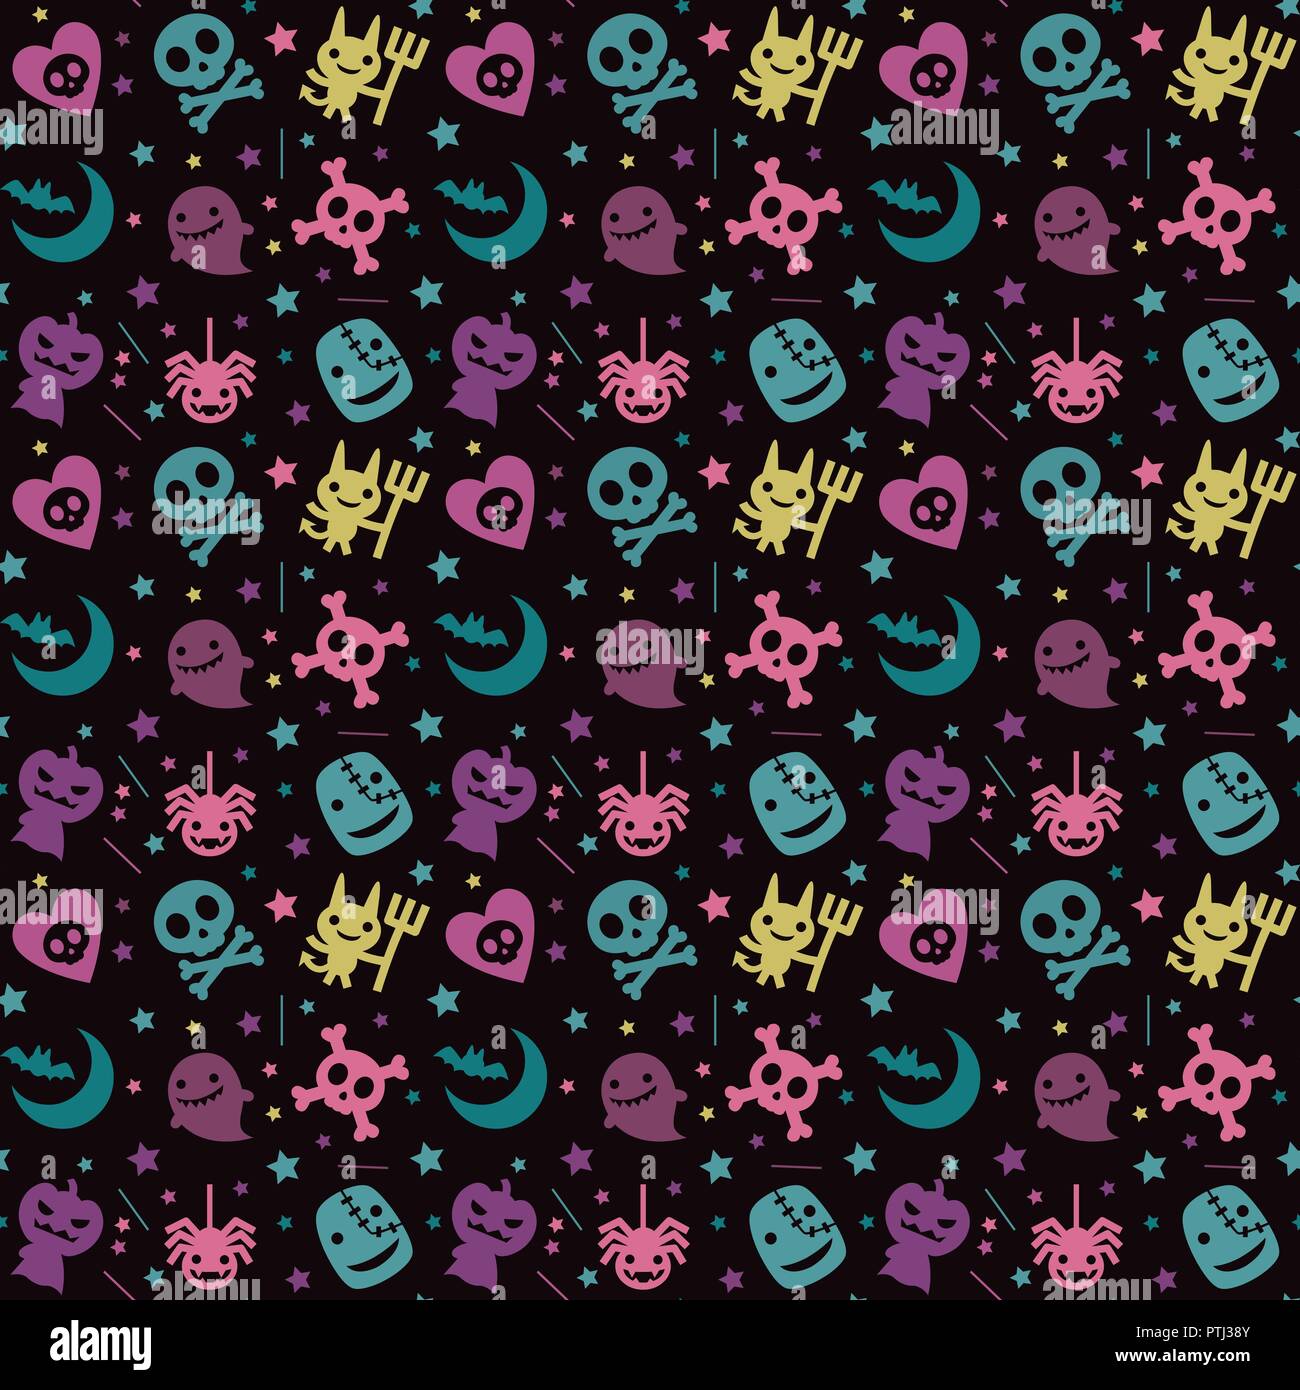 Seamless pattern with hearts on black background Cute kawaii pastel   Stock Image  Everypixel